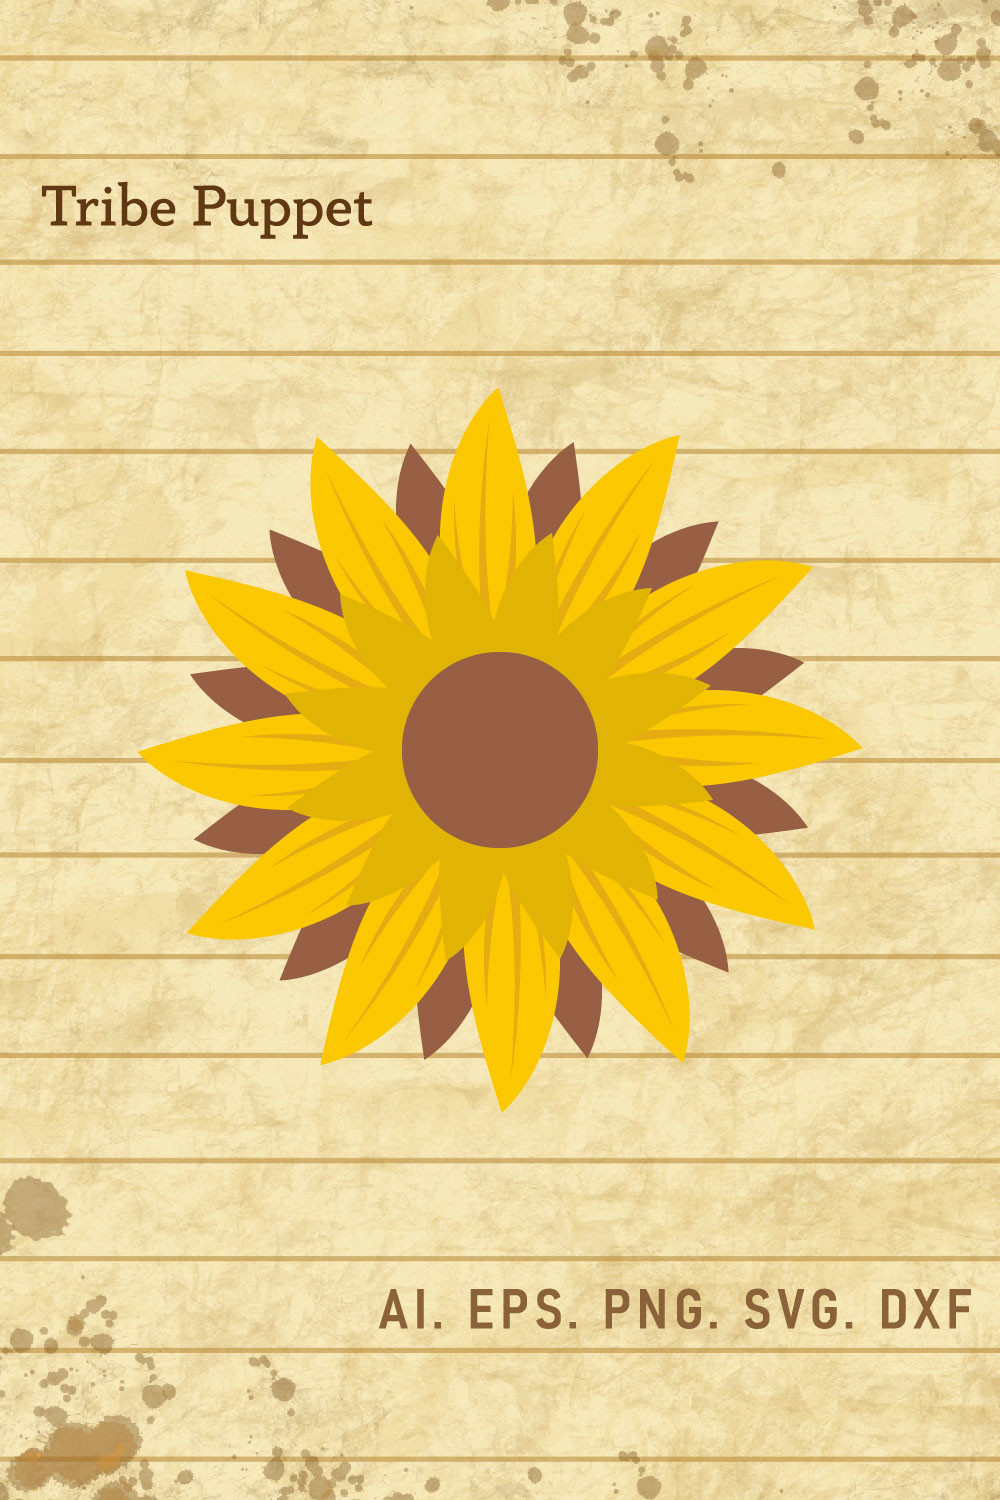 Sunflower 7 pinterest preview image.